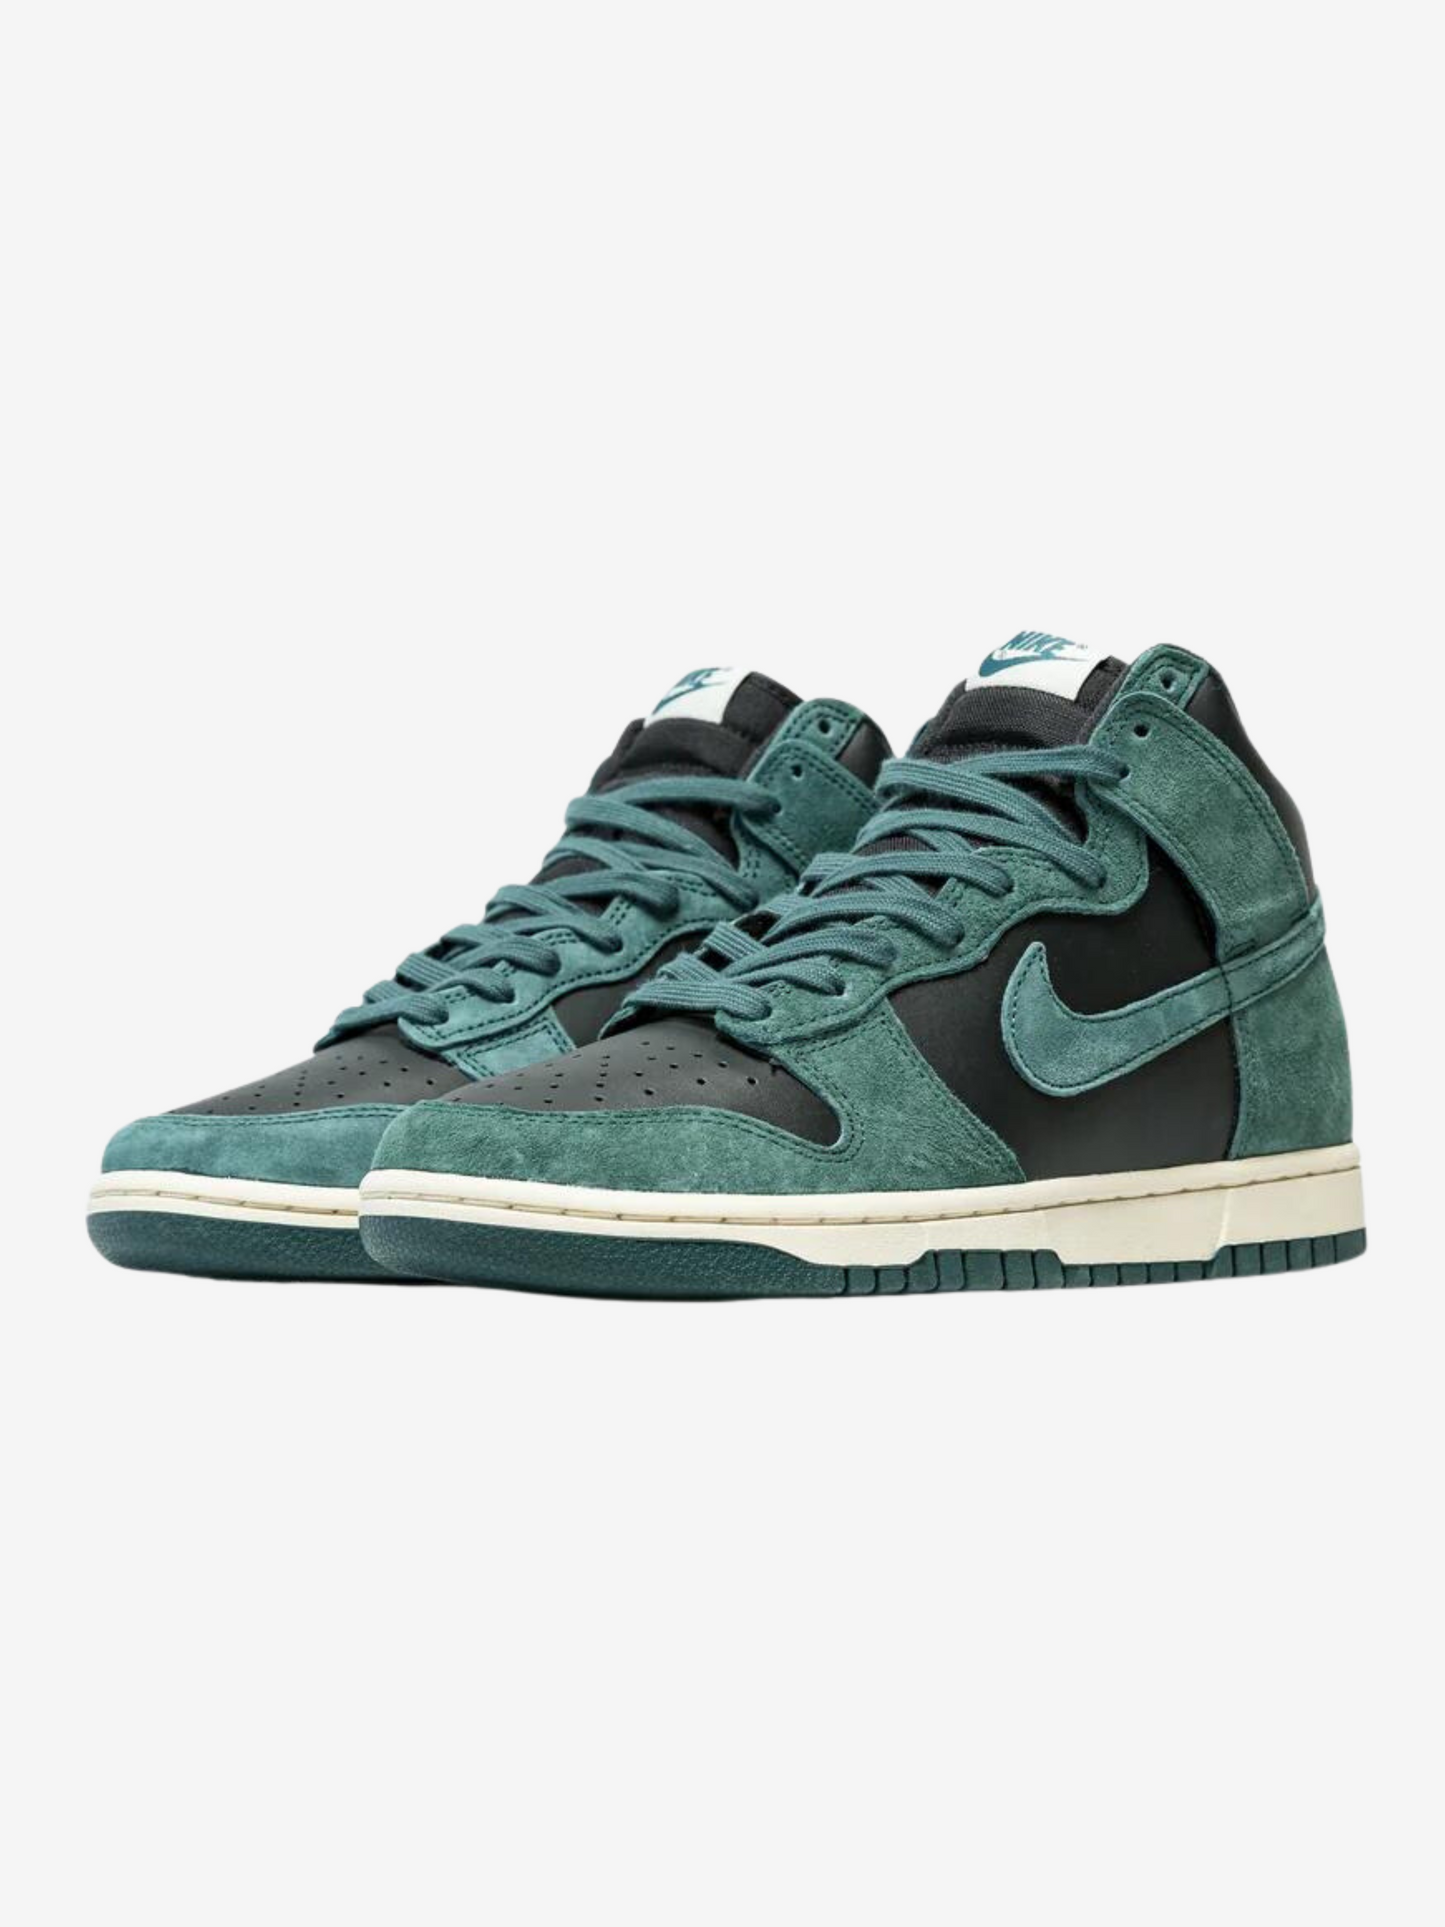 Nike High Dunk Retro PRM Shoes - Black & Faded Spruce Size 12